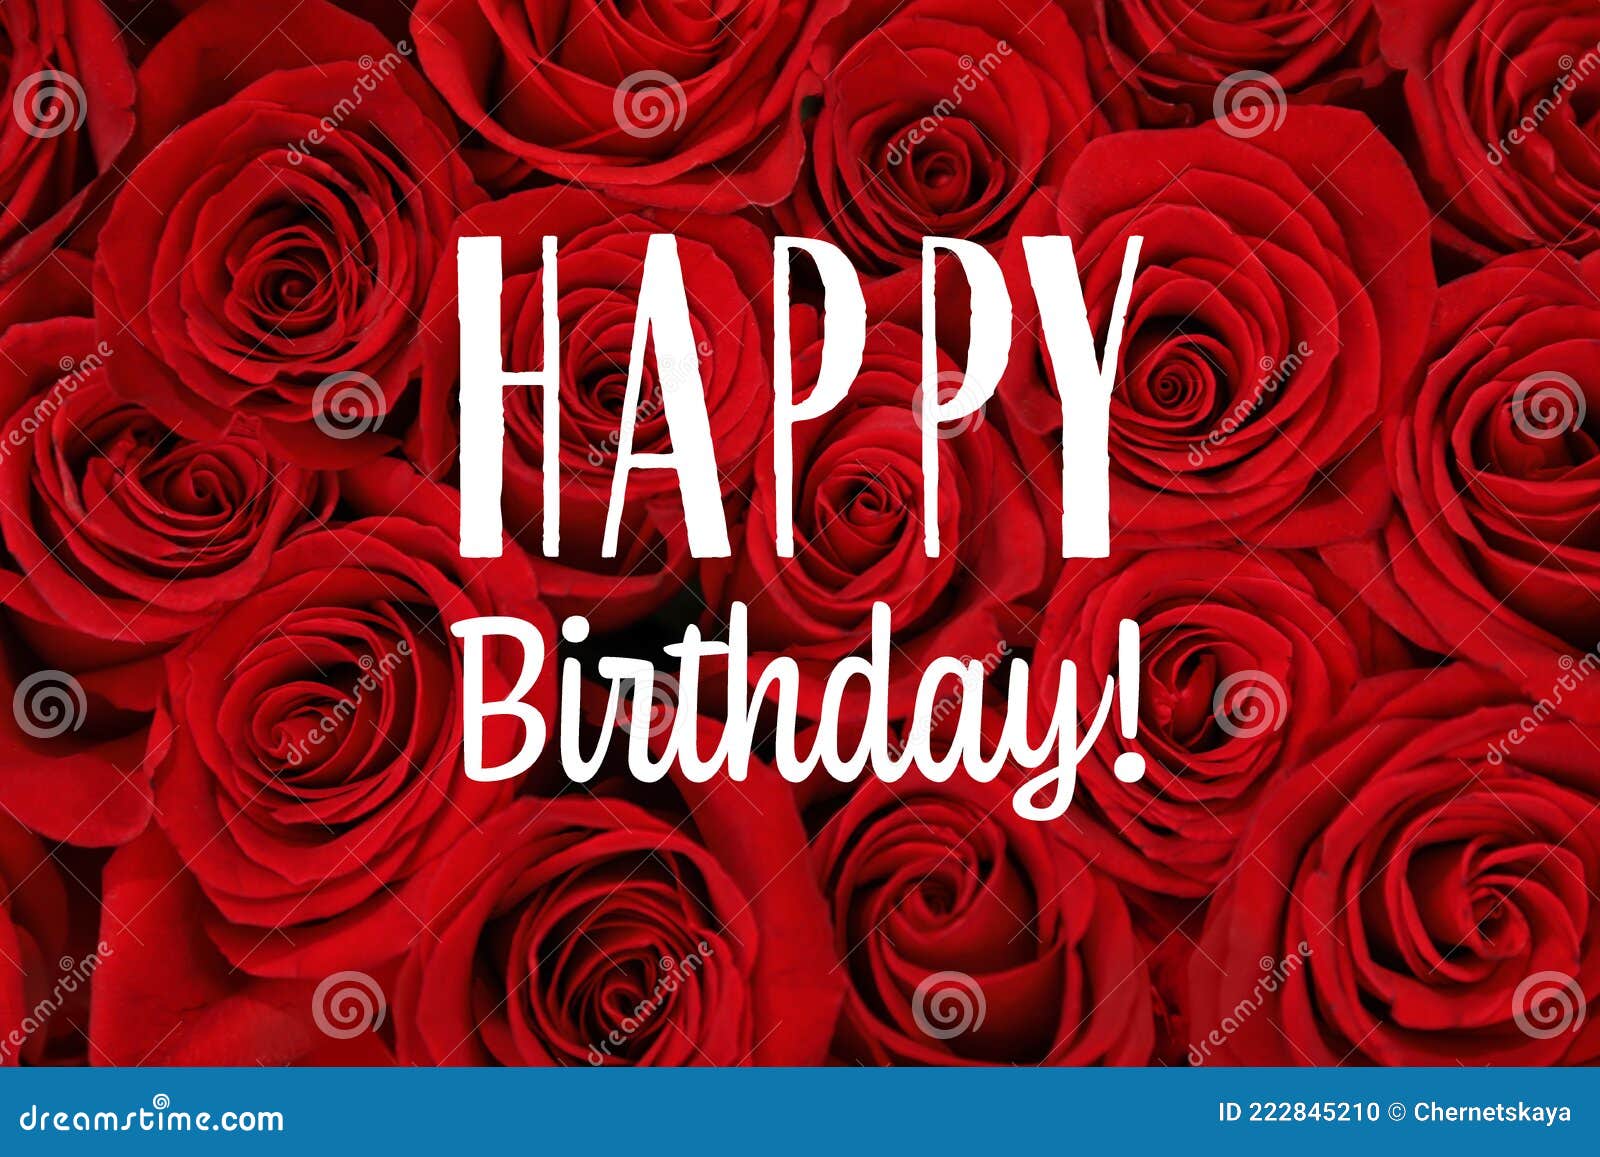 Incredible Compilation of Full 4K Happy Birthday Roses Images - Over ...